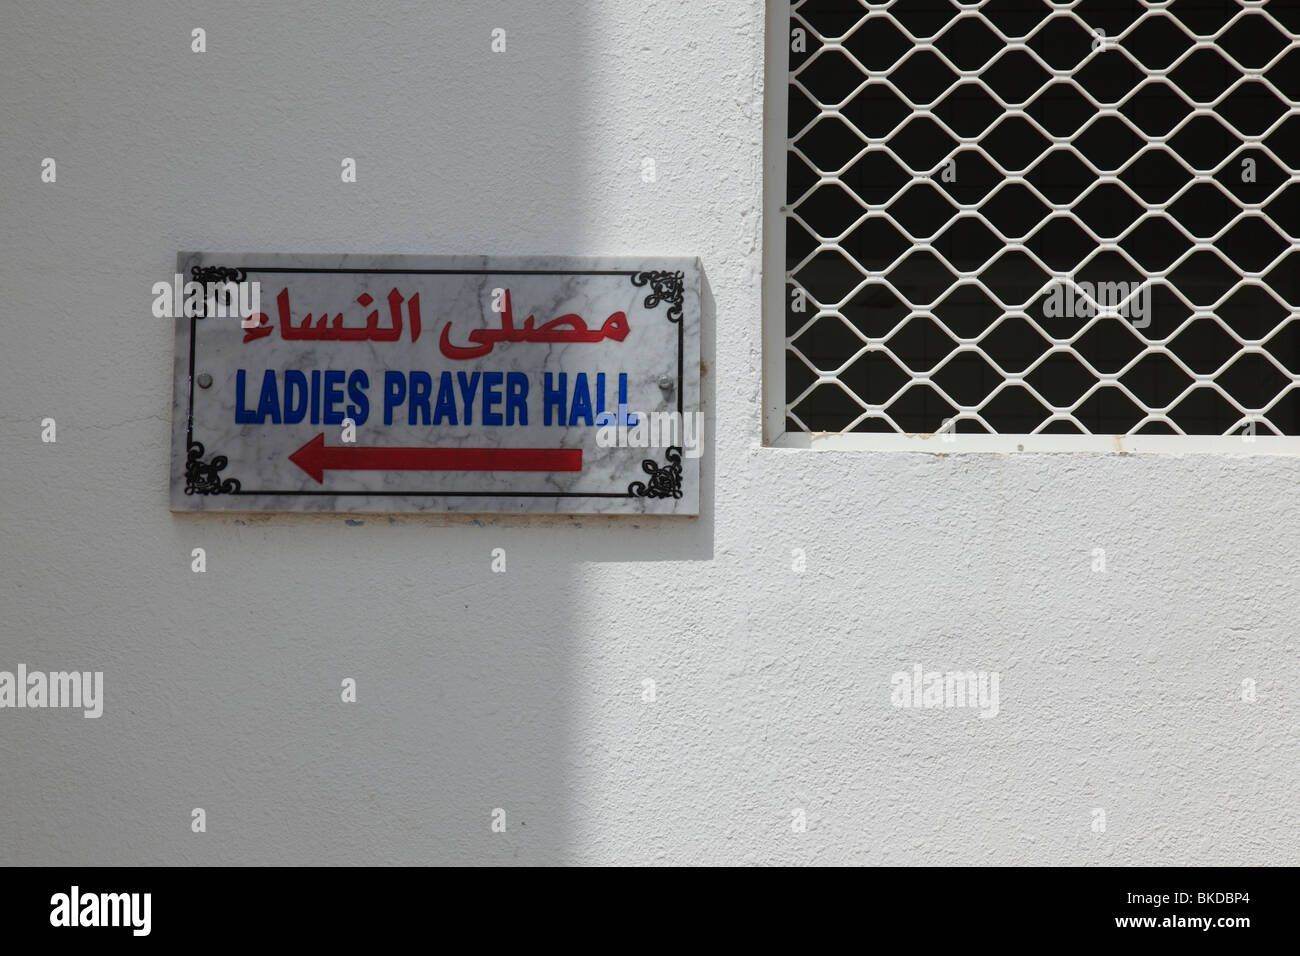 Sign for 'Ladies Prayer Hall' at the mosque in Haramel, Sultanate of Oman. Photo by Willy Matheisl Stock Photo